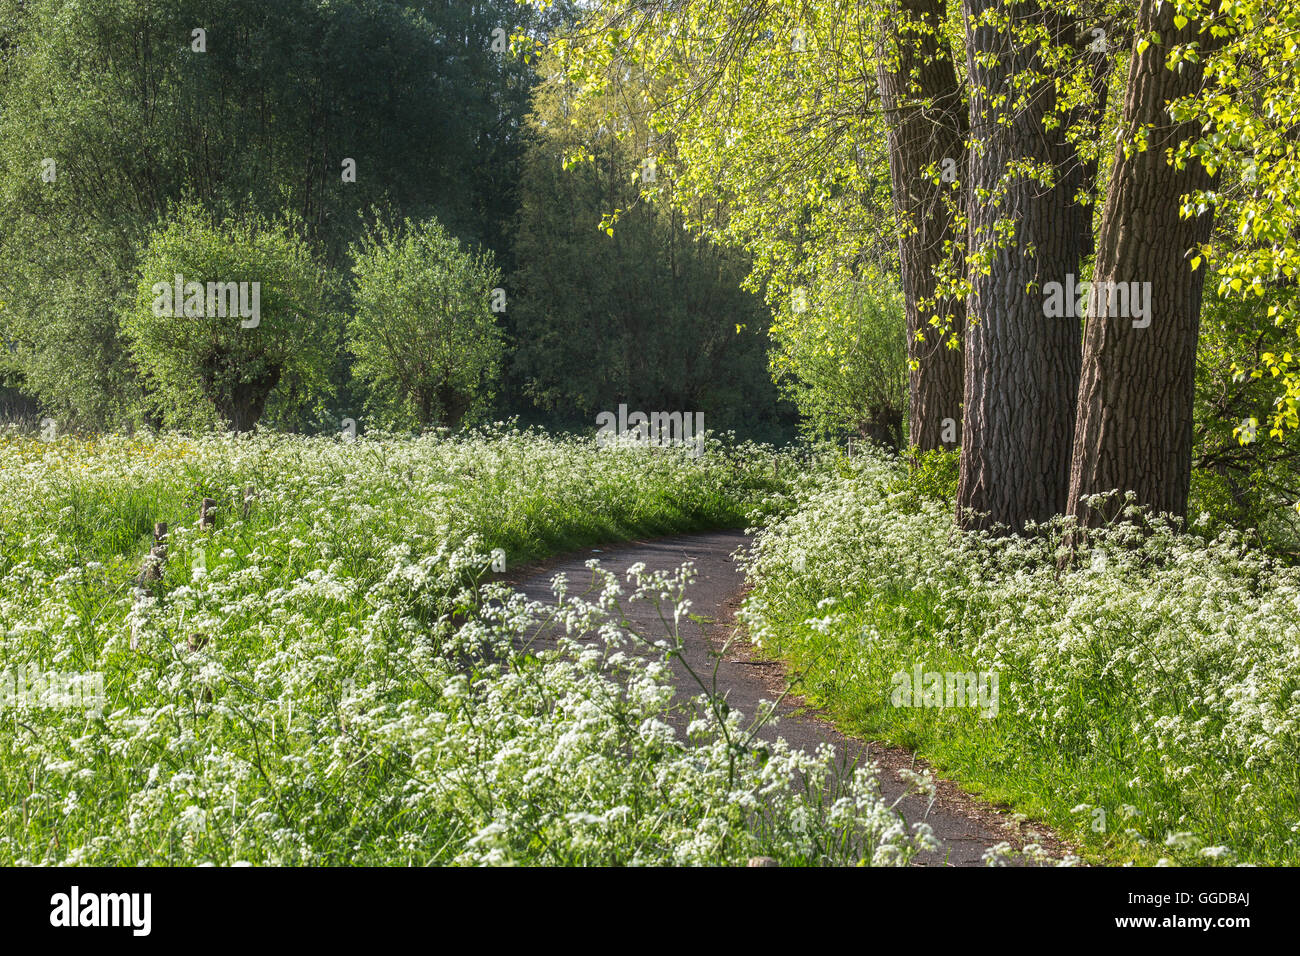 Cow parsley / wild chervil (Anthriscus sylvestris) in flower along path in spring Stock Photo